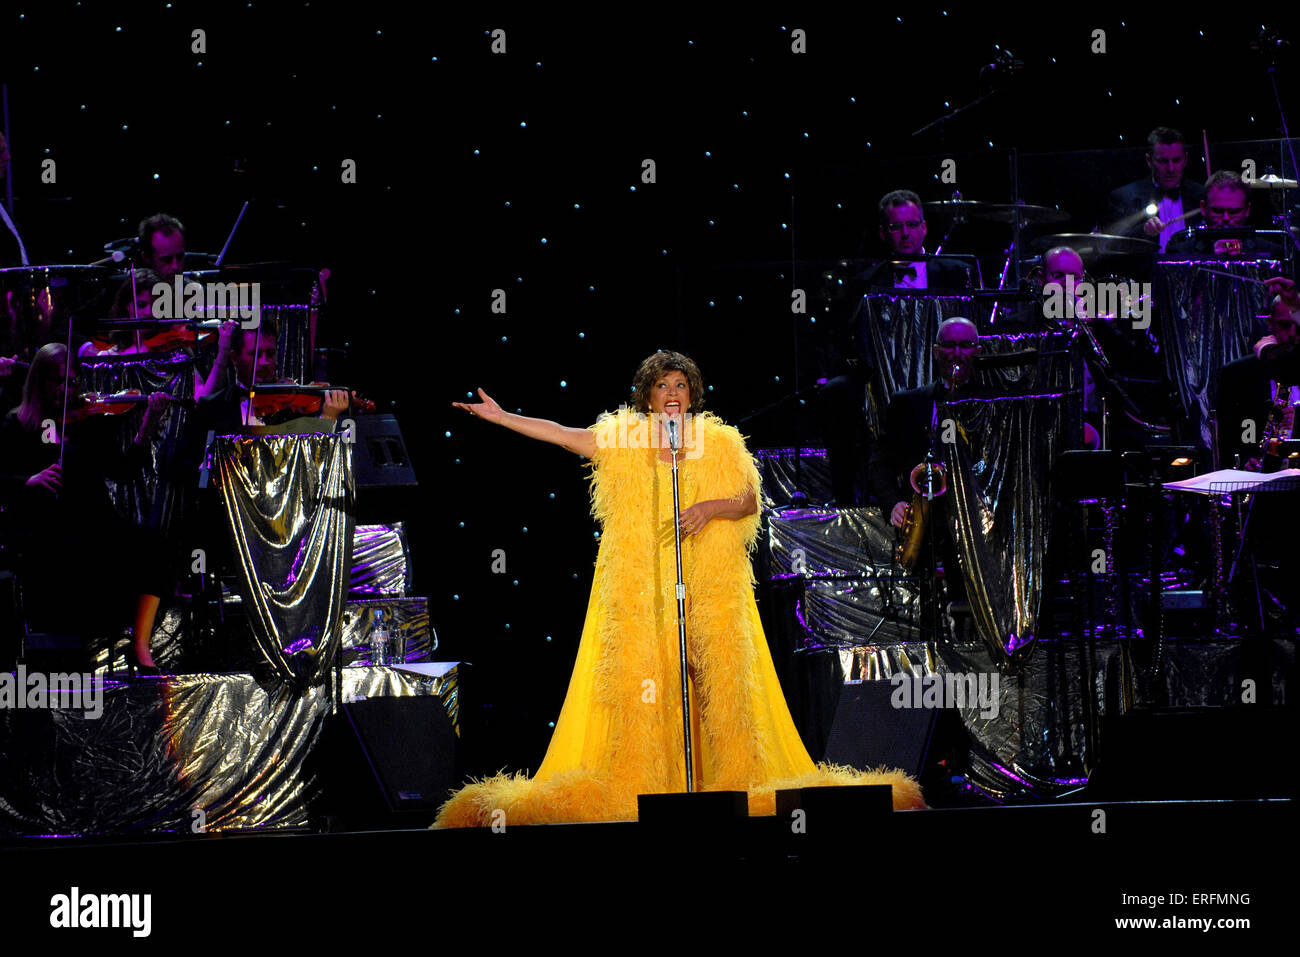 Shirley Bassey - Welsh singer performing at the Wembley Arena, London, UK, 9 June 2006. B. 8 January 1937, Dame Veronica Shirley Bassey. Wearing yellow dress. Gold decorations. Orchestra in the background. James Bond connection. Stock Photo